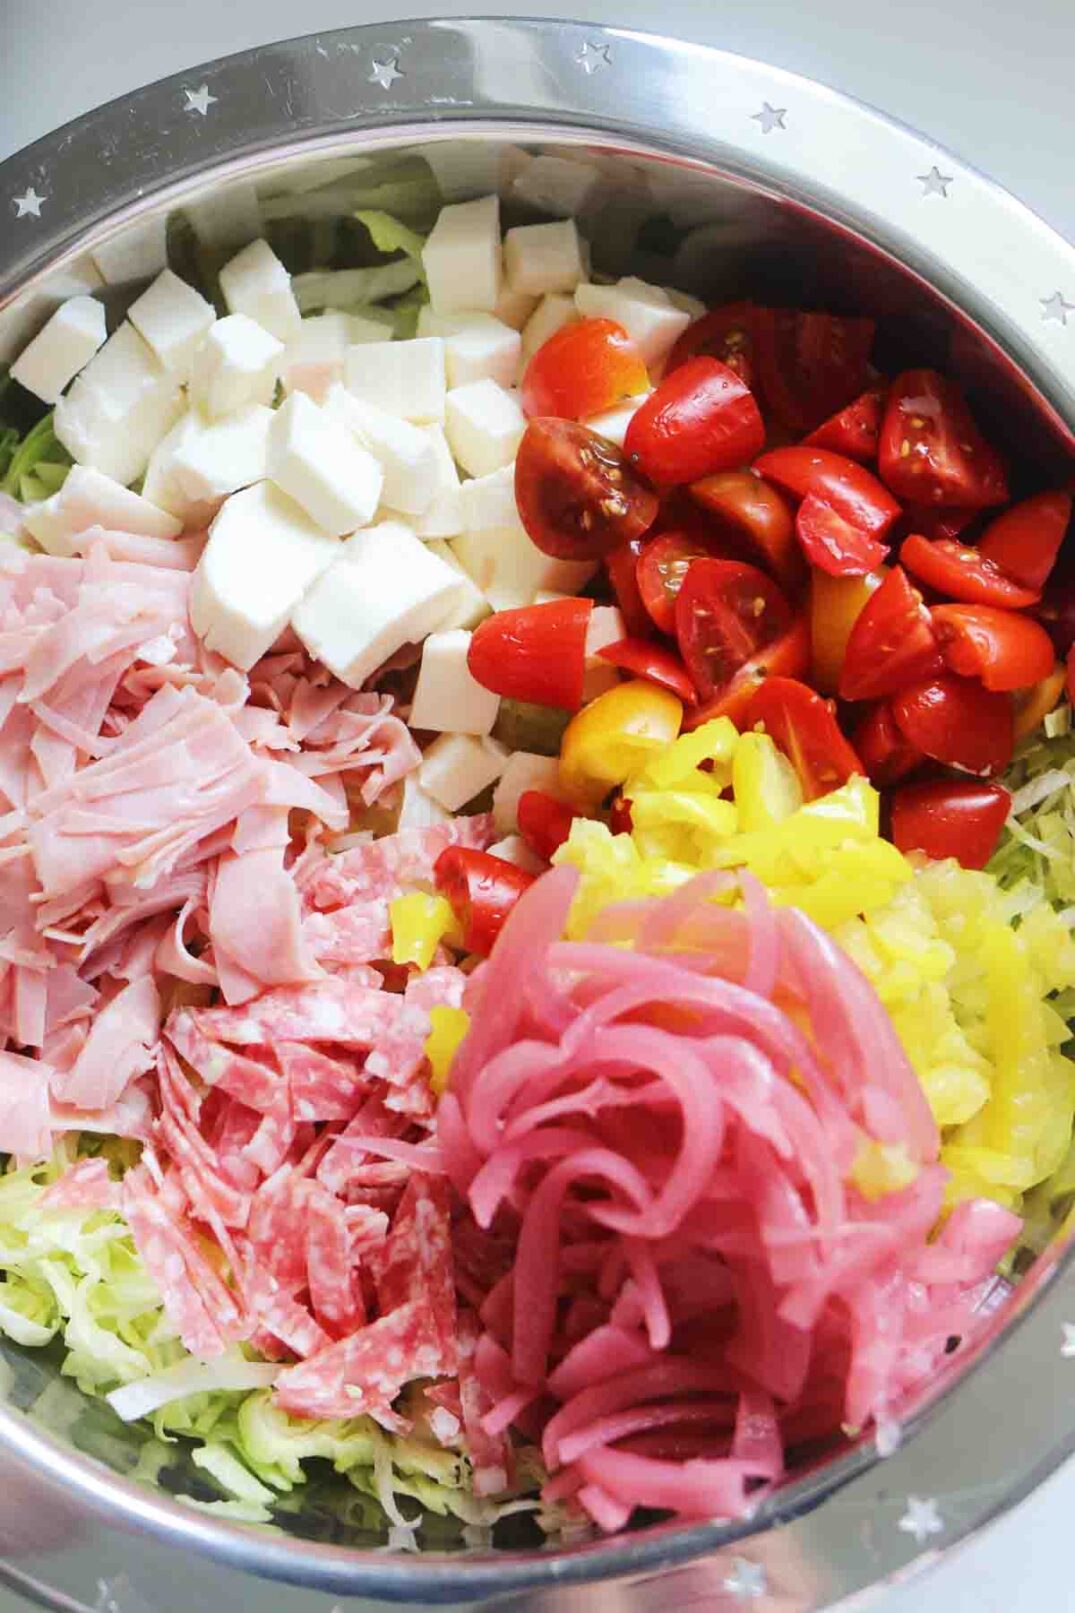 chopped up italian cold cuts and colorful veggies in a silver bowl with shredded lettuce.